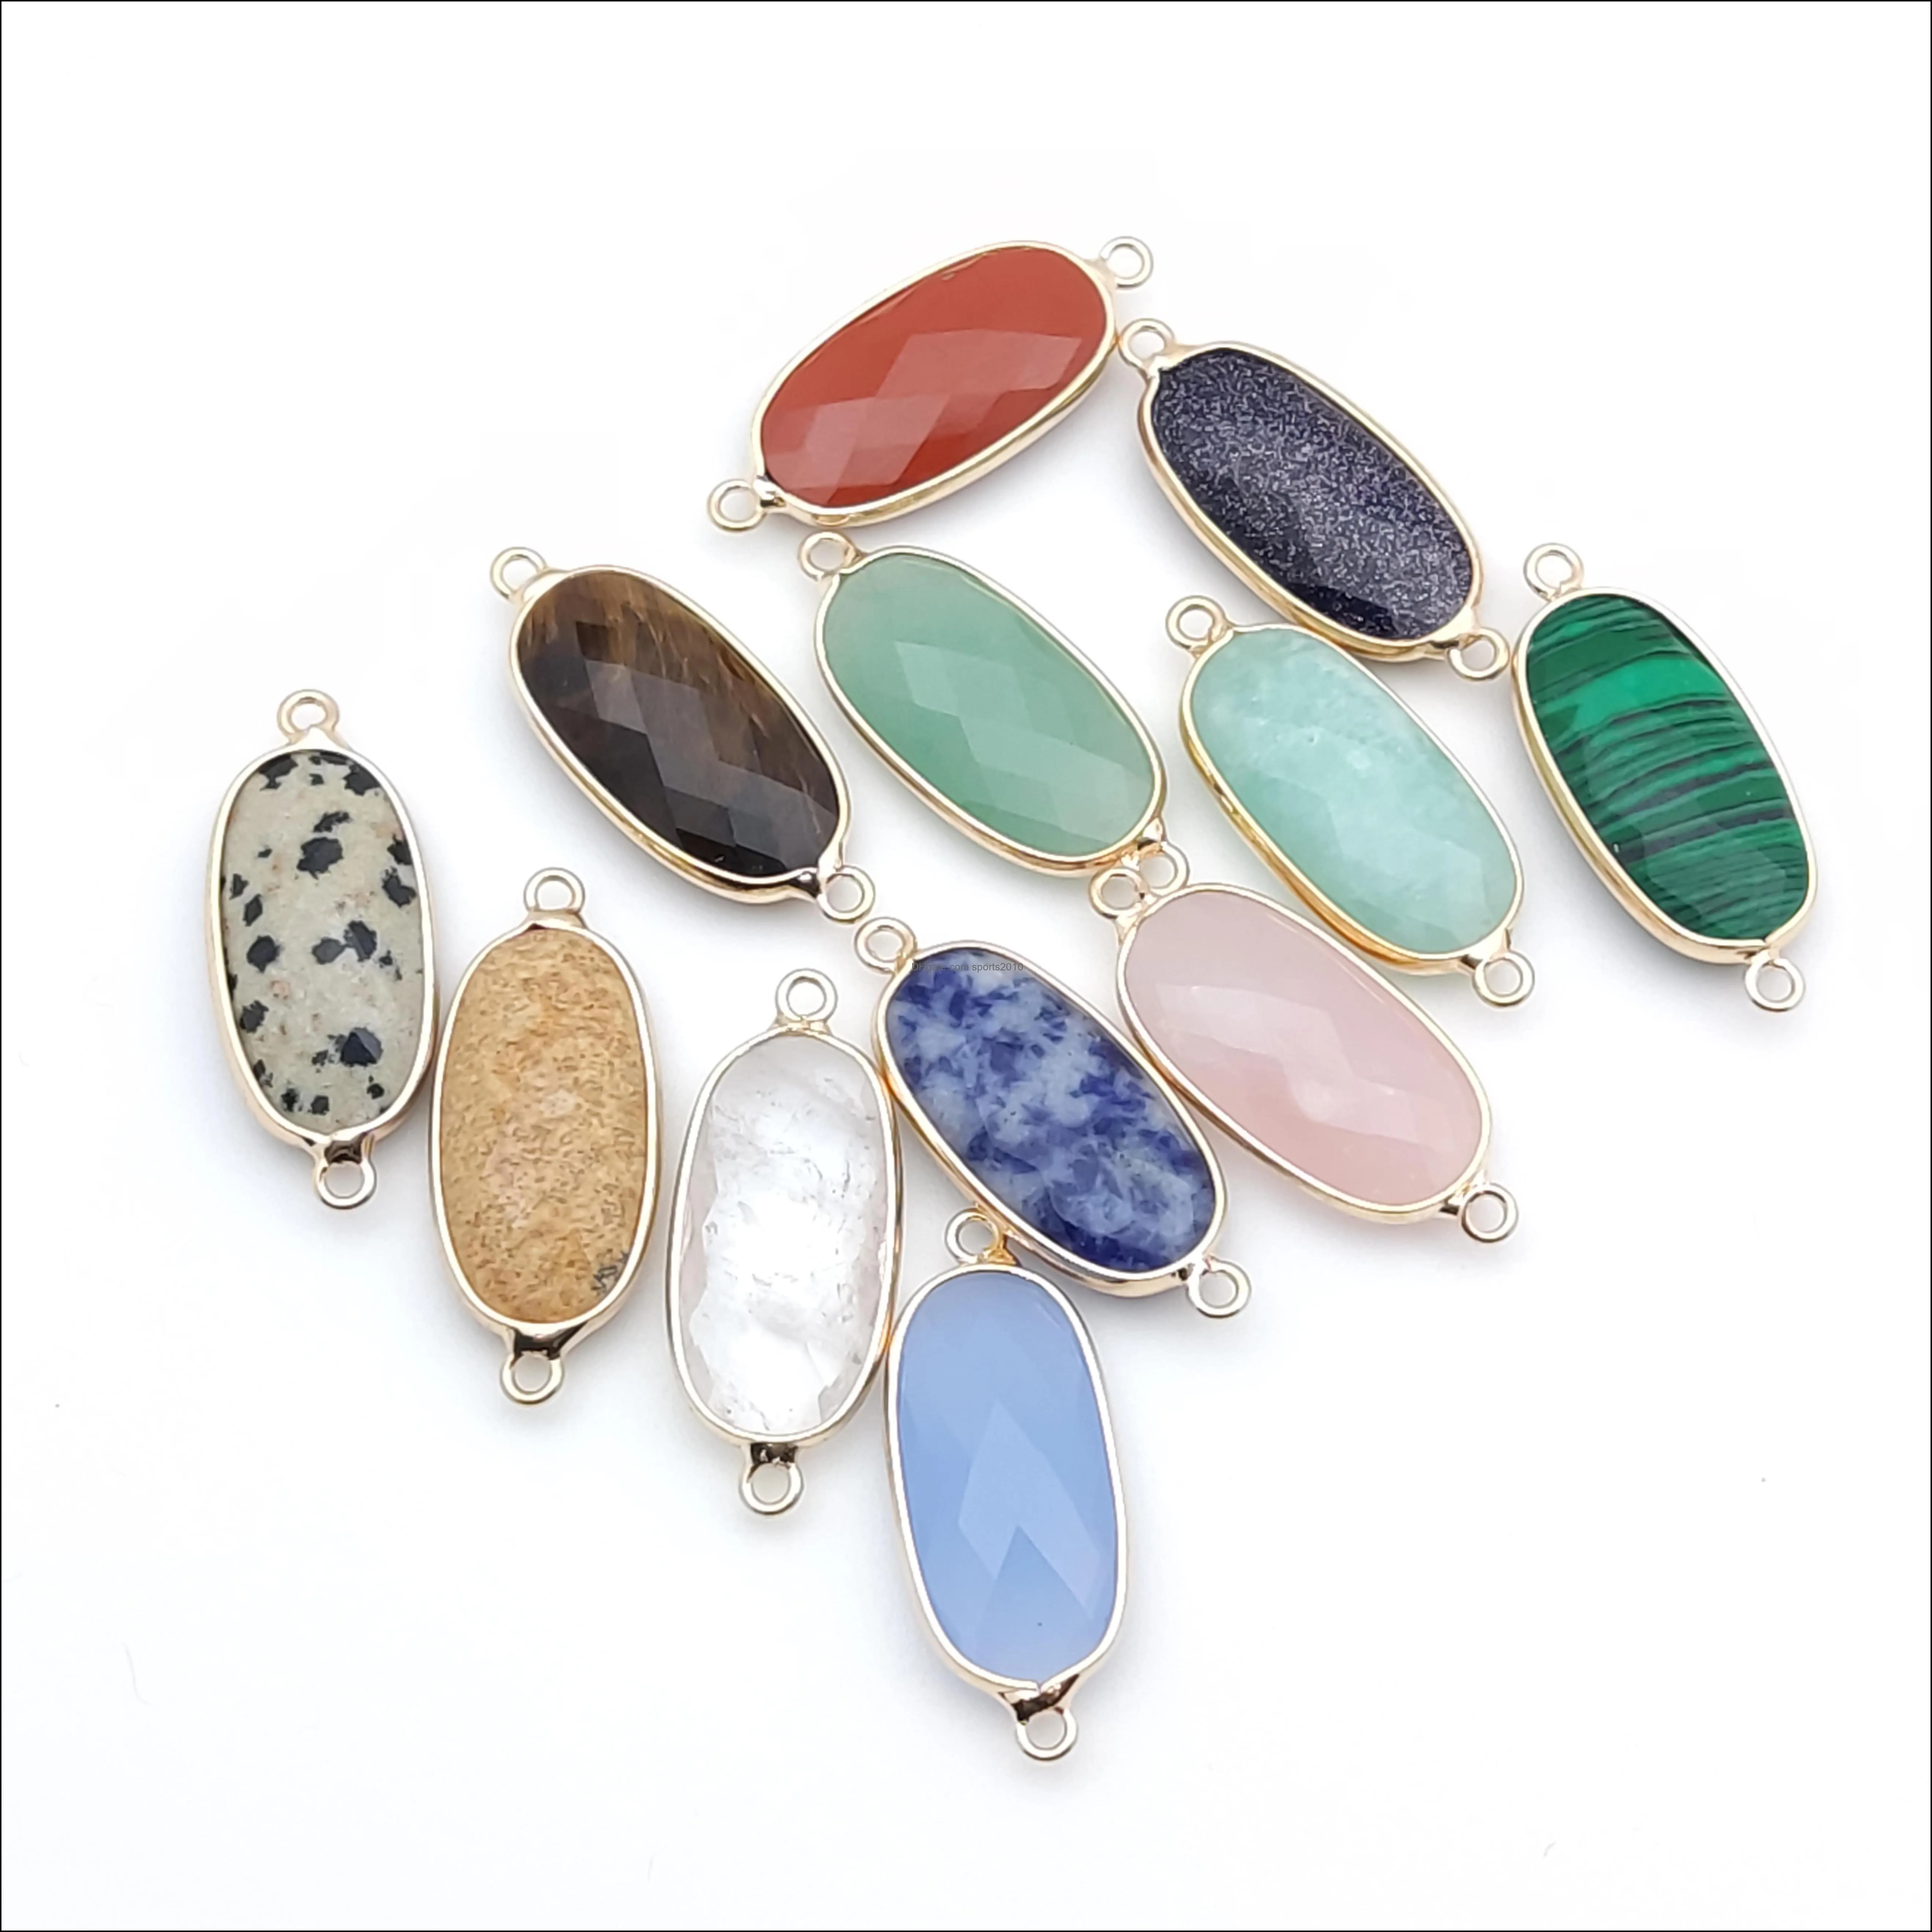 gold edged natural stone charms green rose quartz crystal connector pendant for earrings necklace jewelry making sports2010